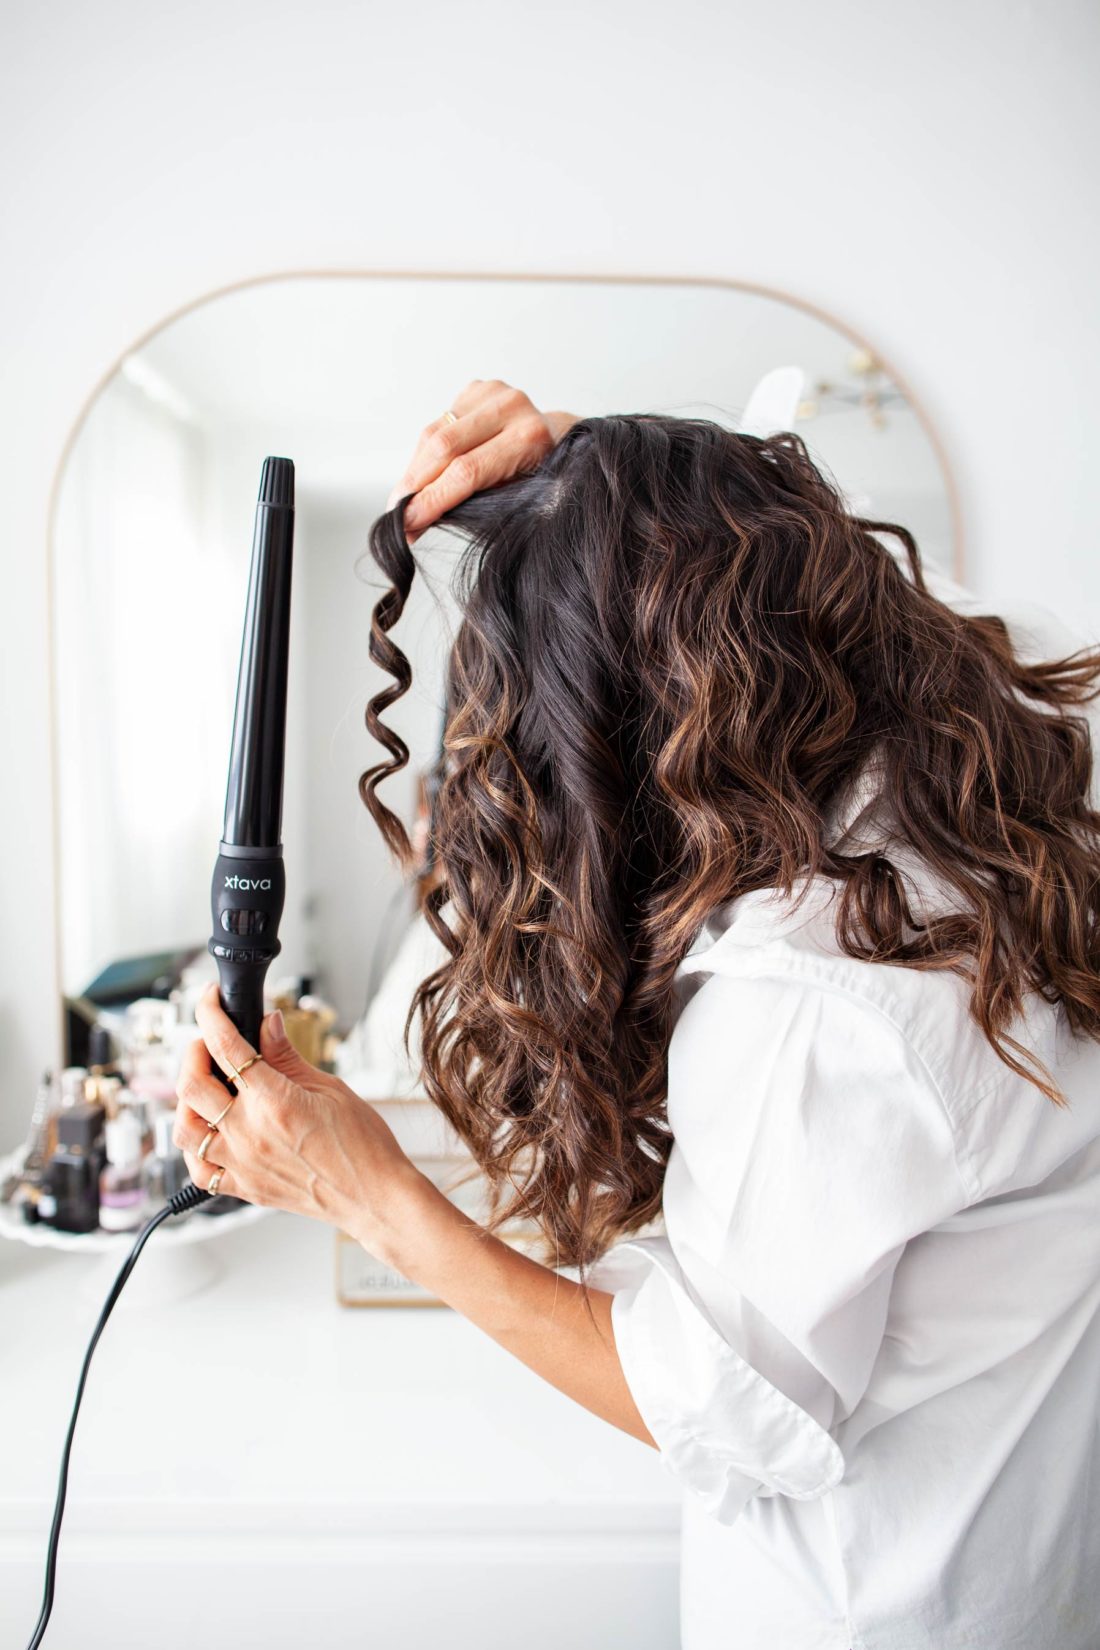 Xtava It Curl Curling Wand from Amazon Curling wand makes perfect waves